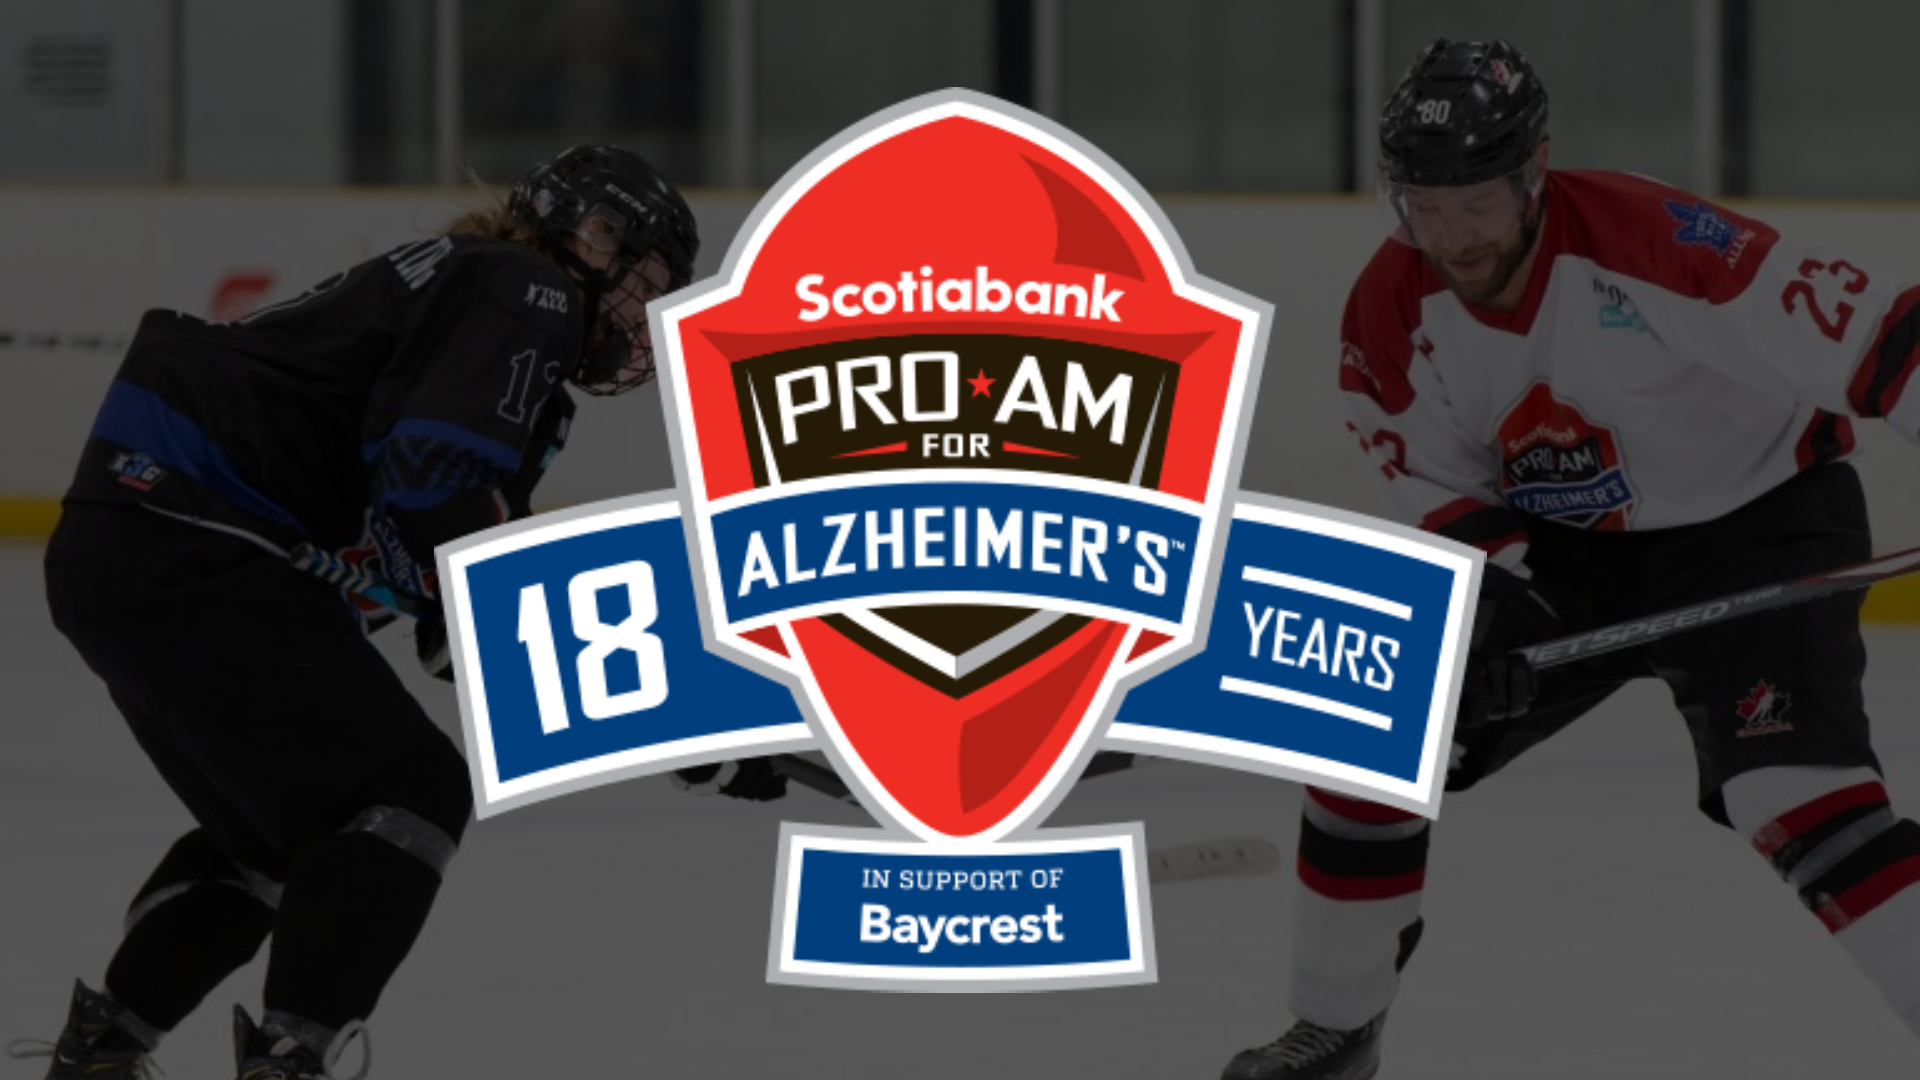 Scotiabank Pro-Am for Alzheimer’s in support of Baycrest